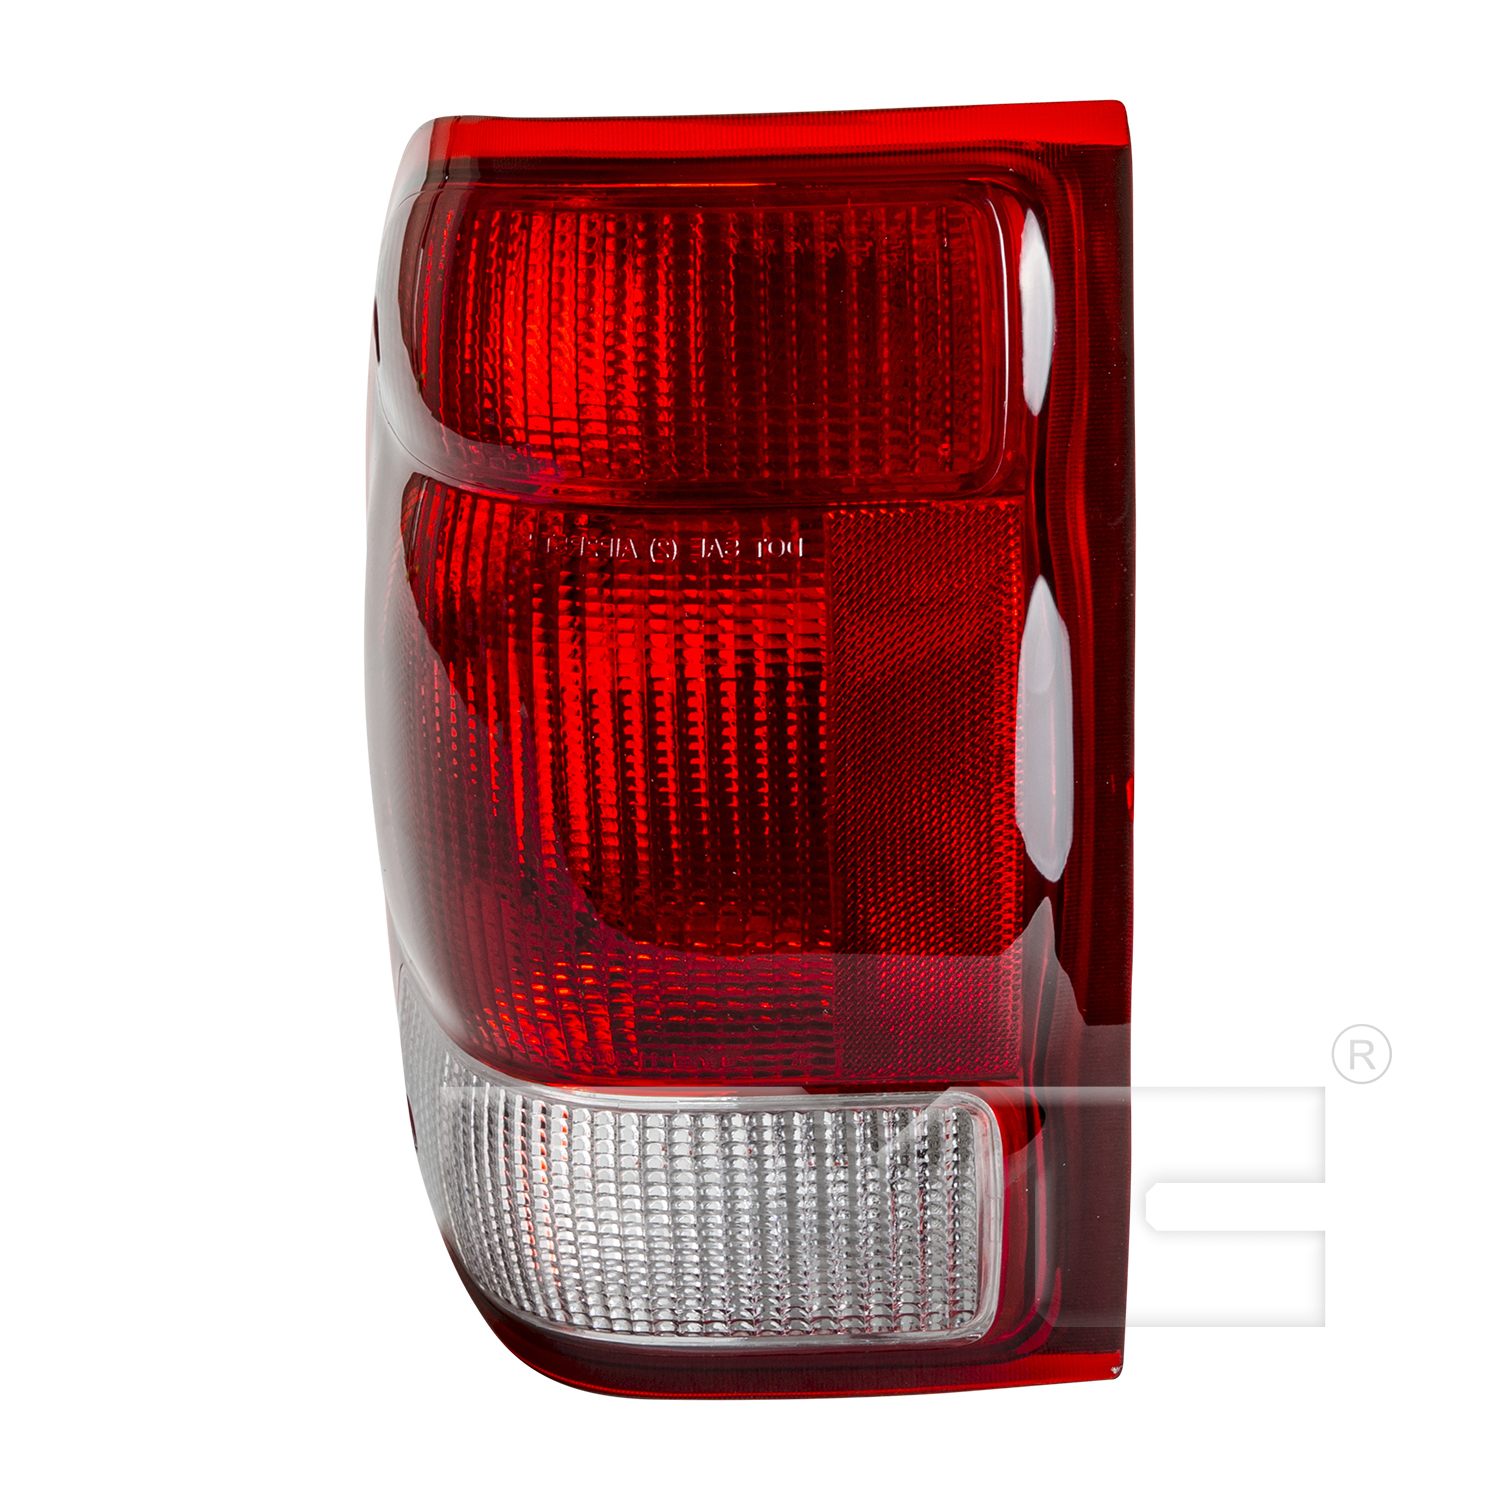 Aftermarket TAILLIGHTS for FORD - RANGER, RANGER,00-00,LT Taillamp assy